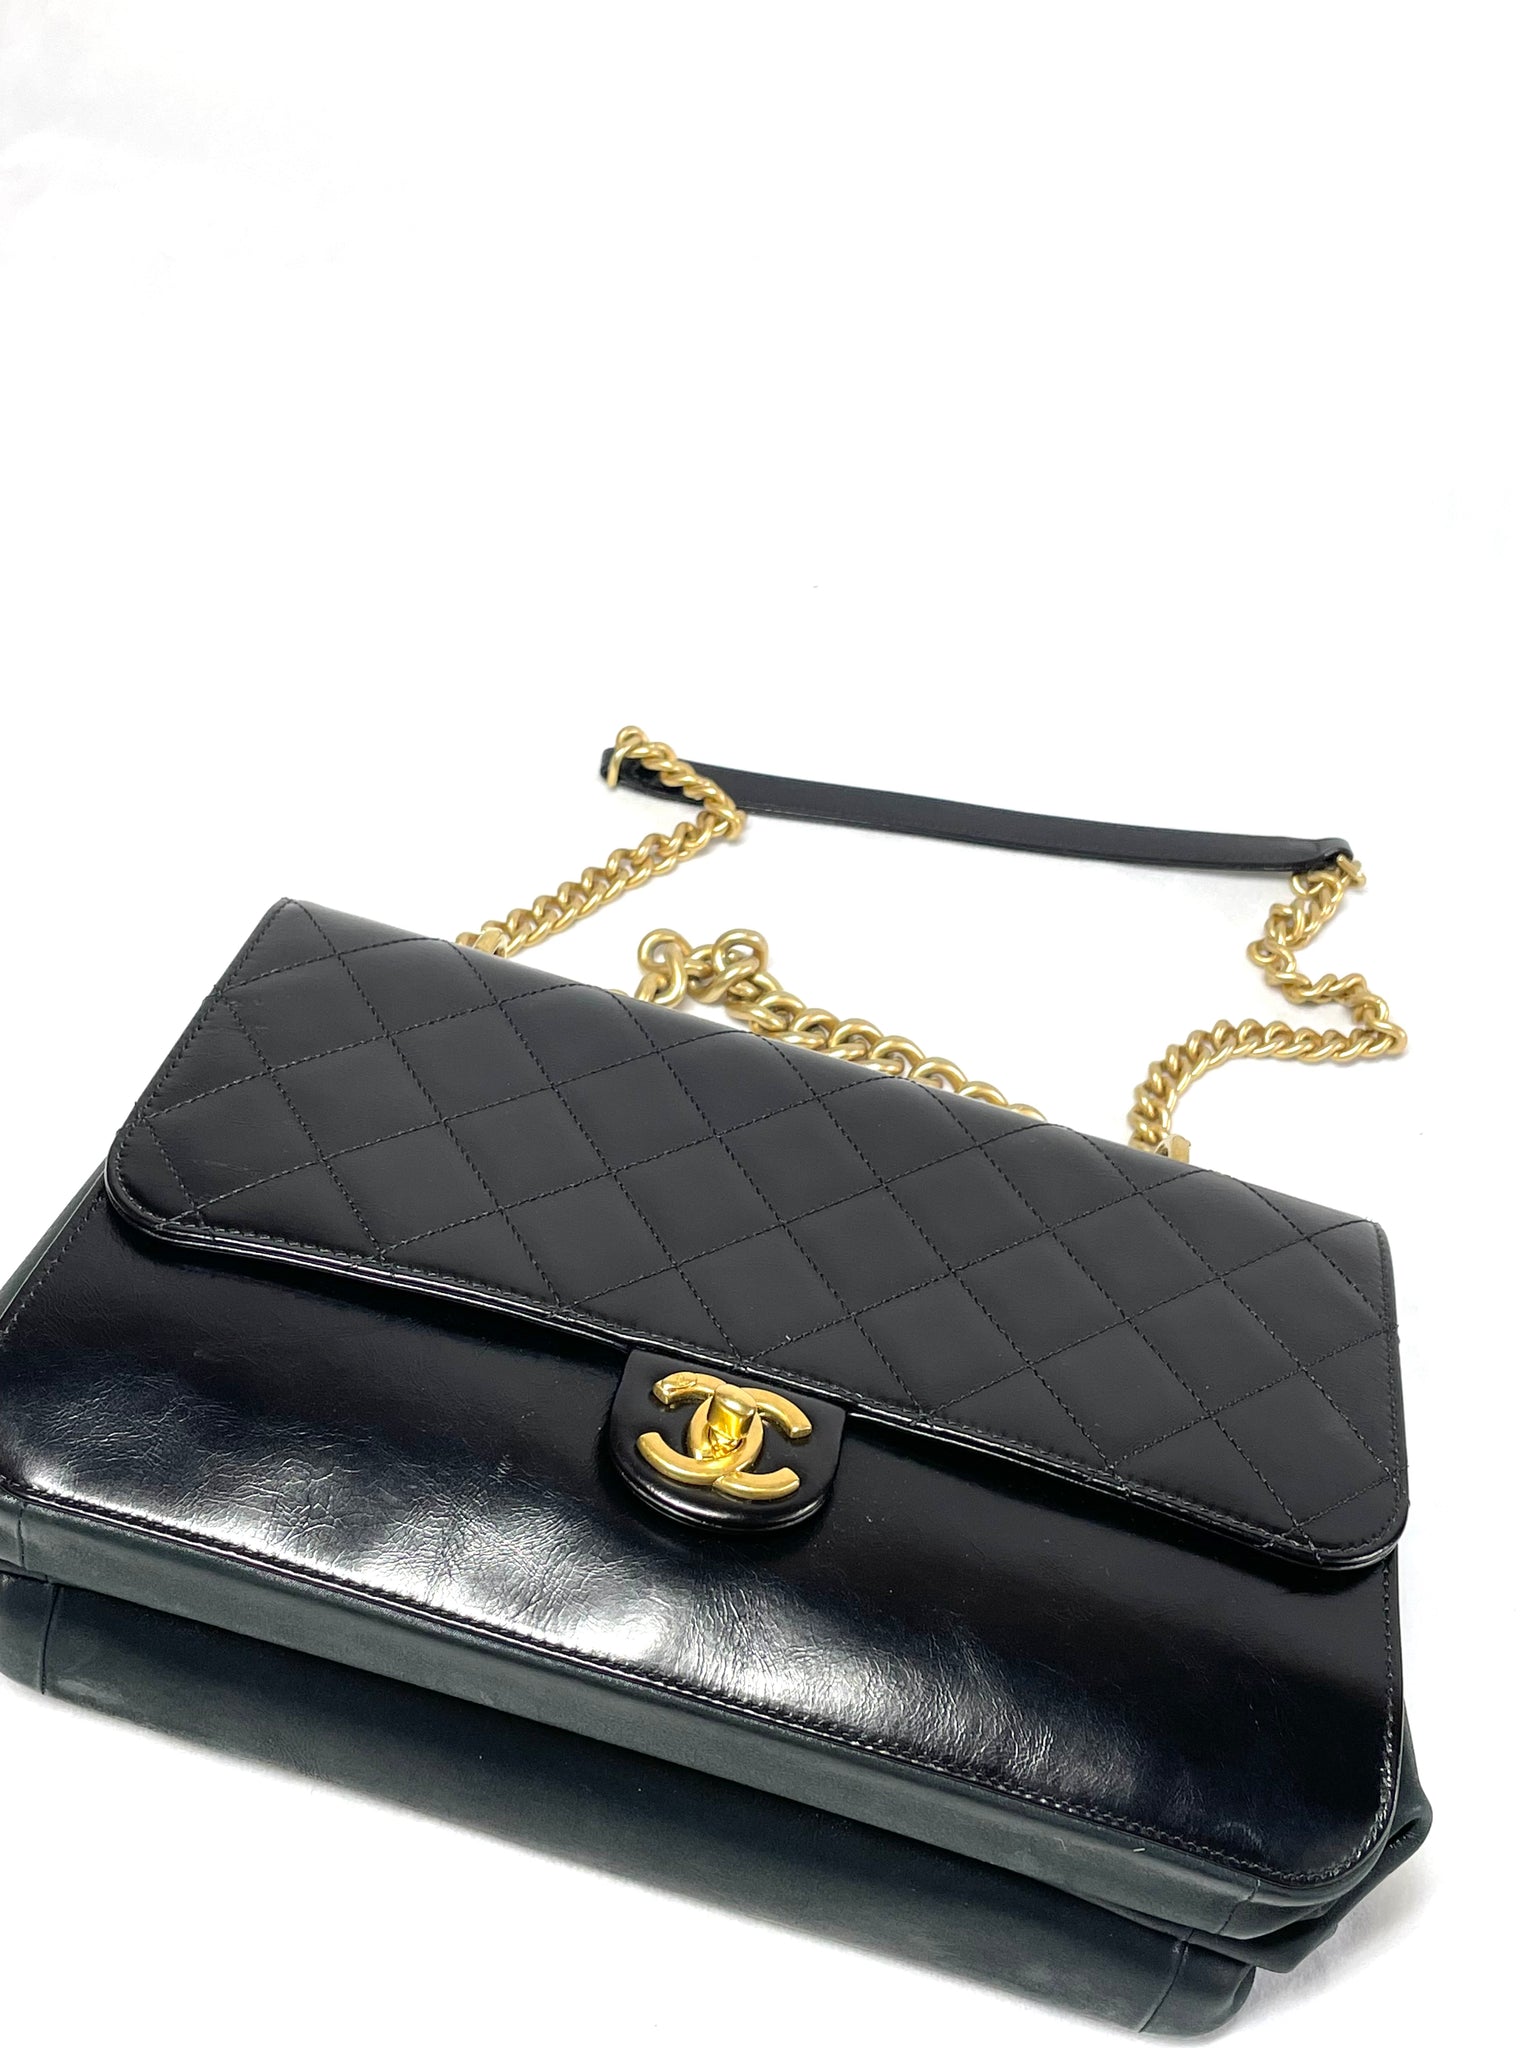 Photo of Chanel Cosmopolite Bag in black with gold hardware available at UniKoncept in Waterloo